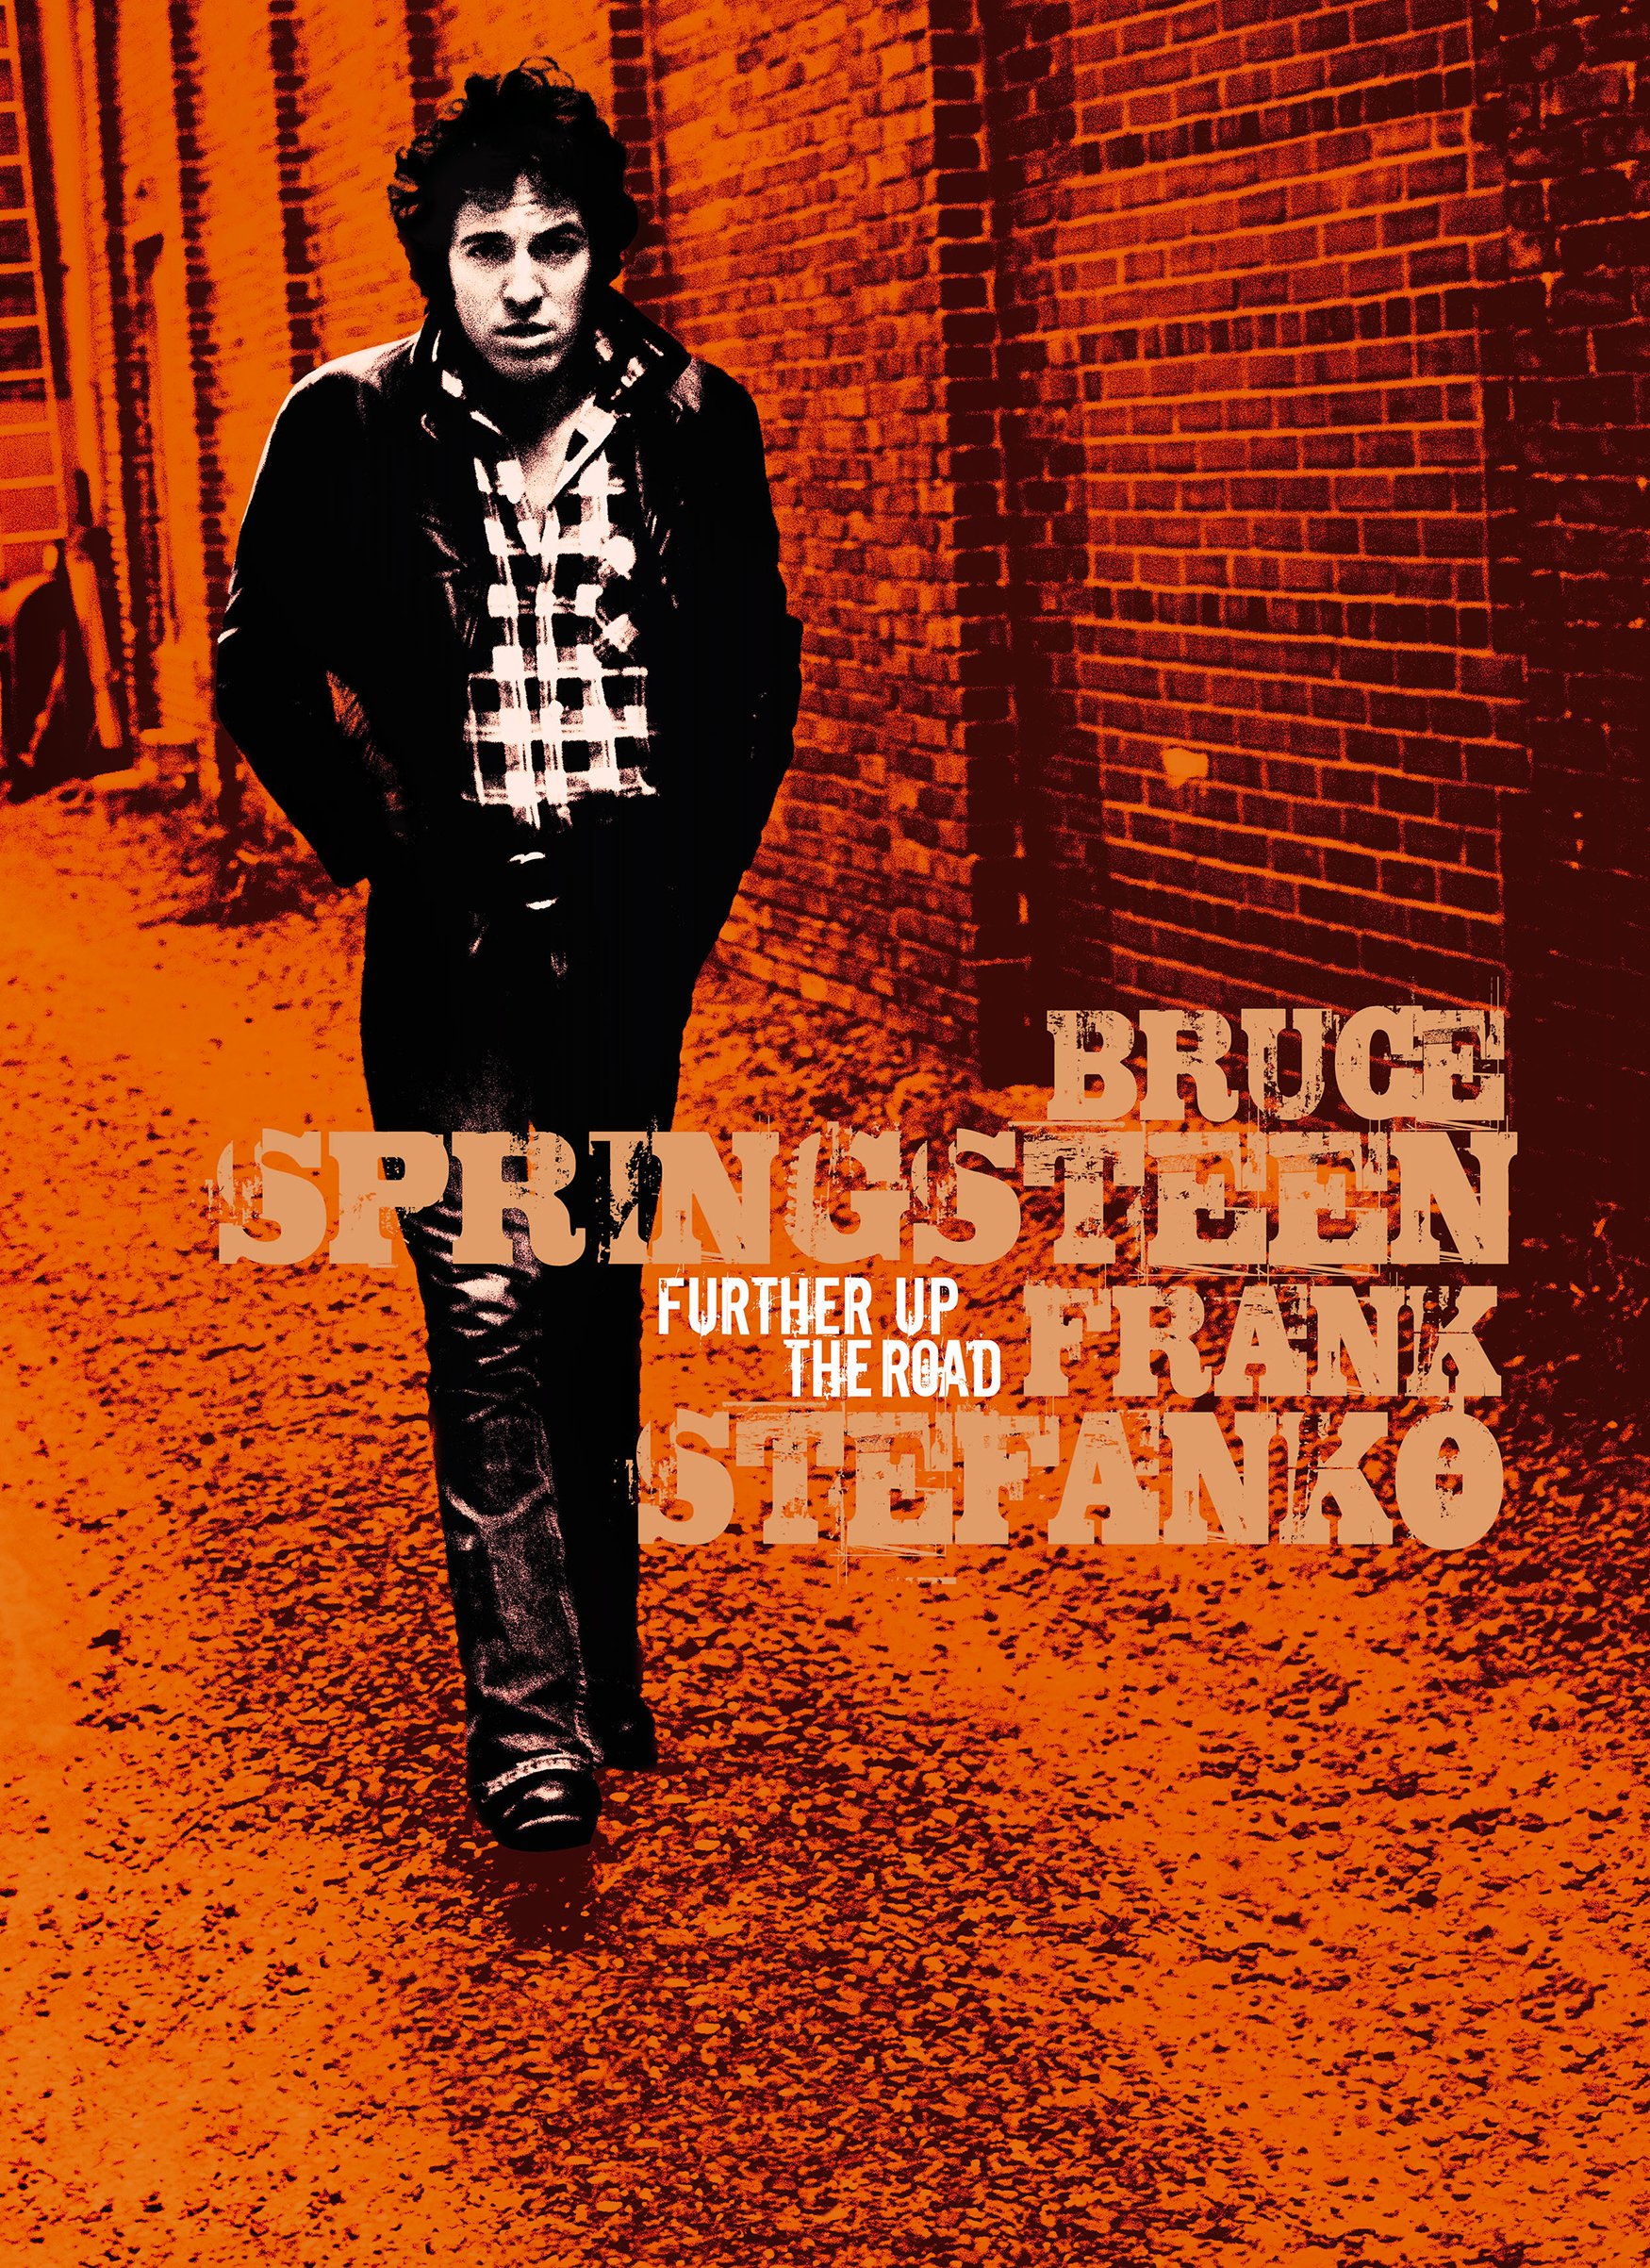 Bruce Springsteen. Further Up The Road is published by Wall of Sound Editions. (Wall of Sound Editions)